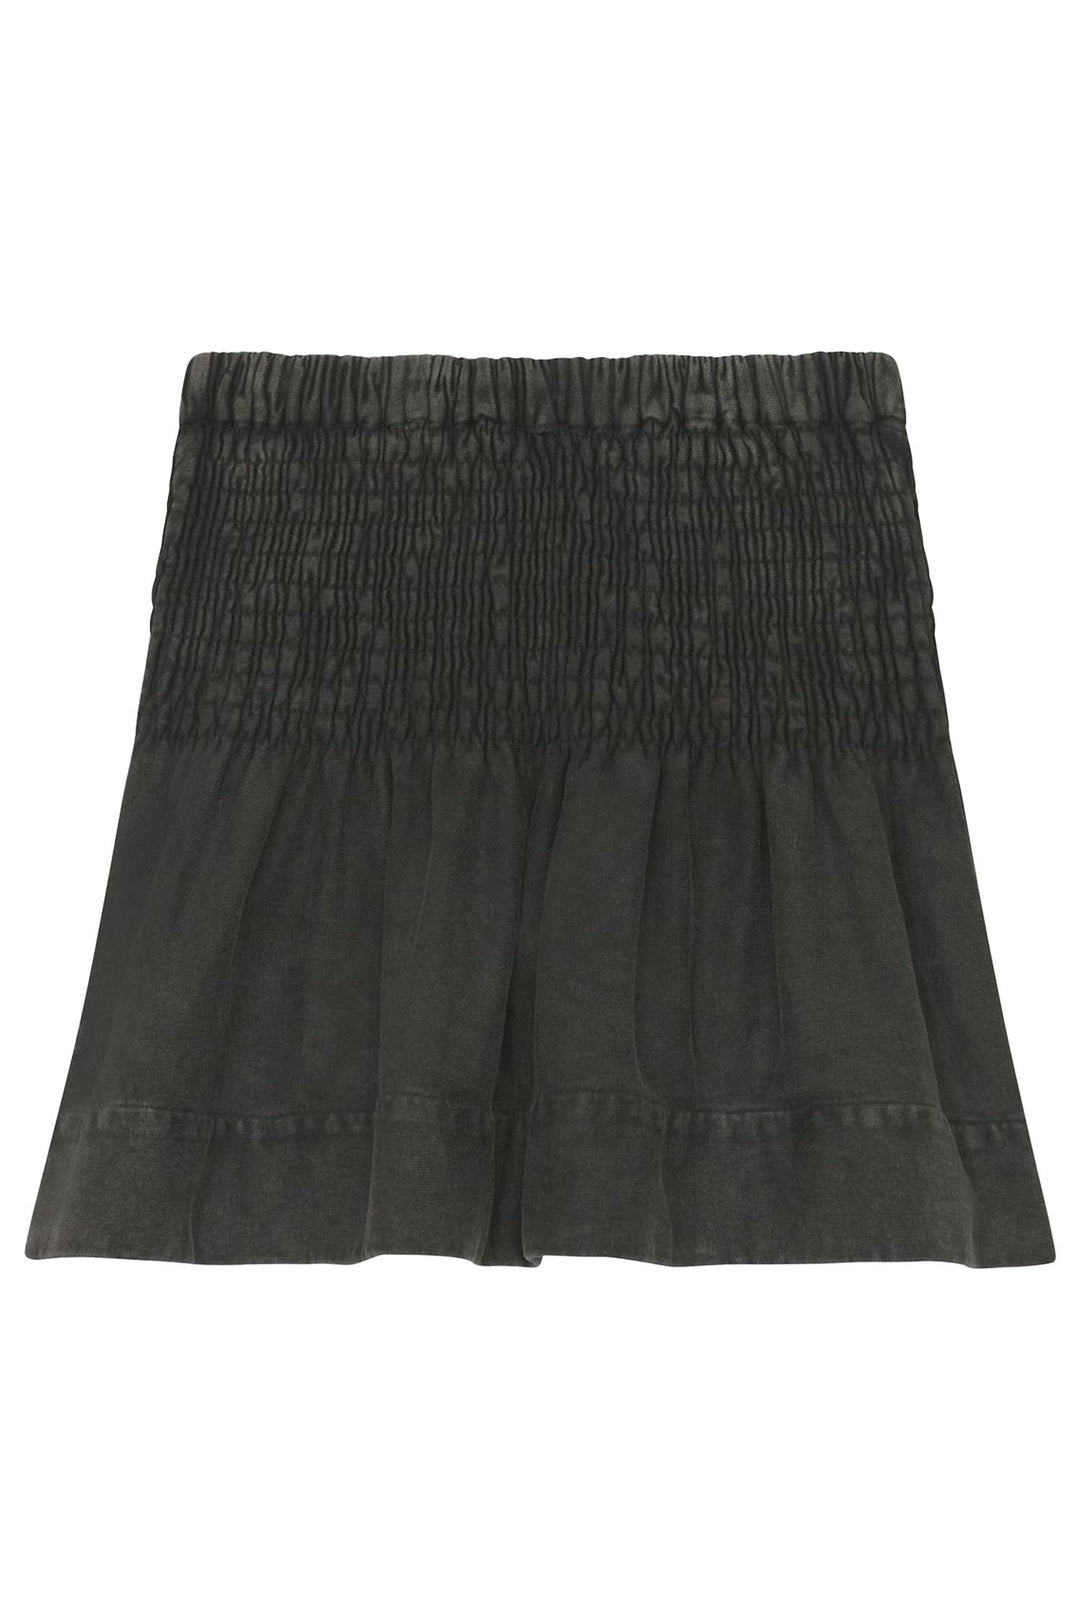 Pacifica Skirt Faded Black